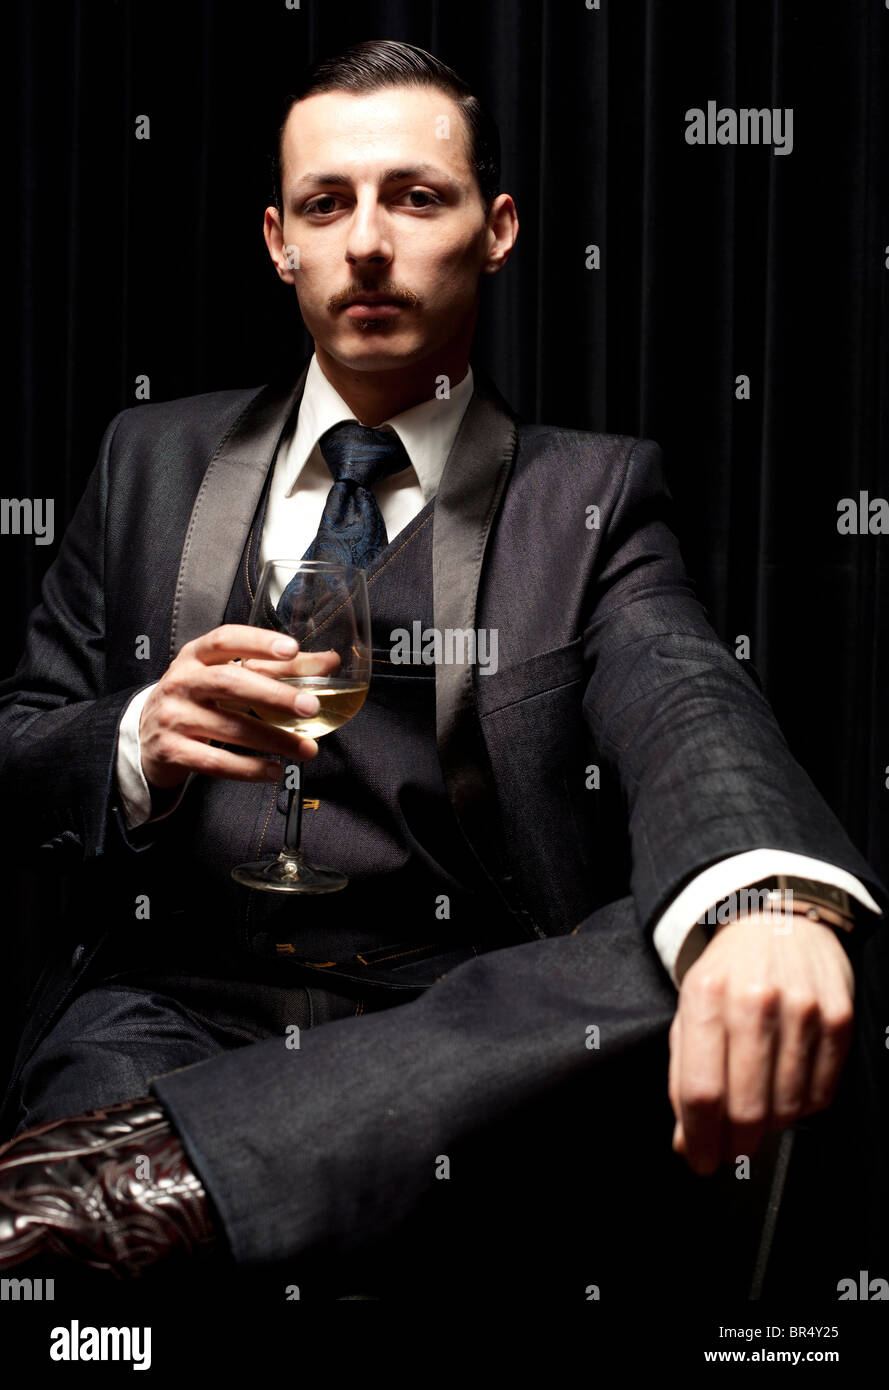 Portrait of a gentleman sitting and holding a glass of wine at a bar, London, England, UK Stock Photo